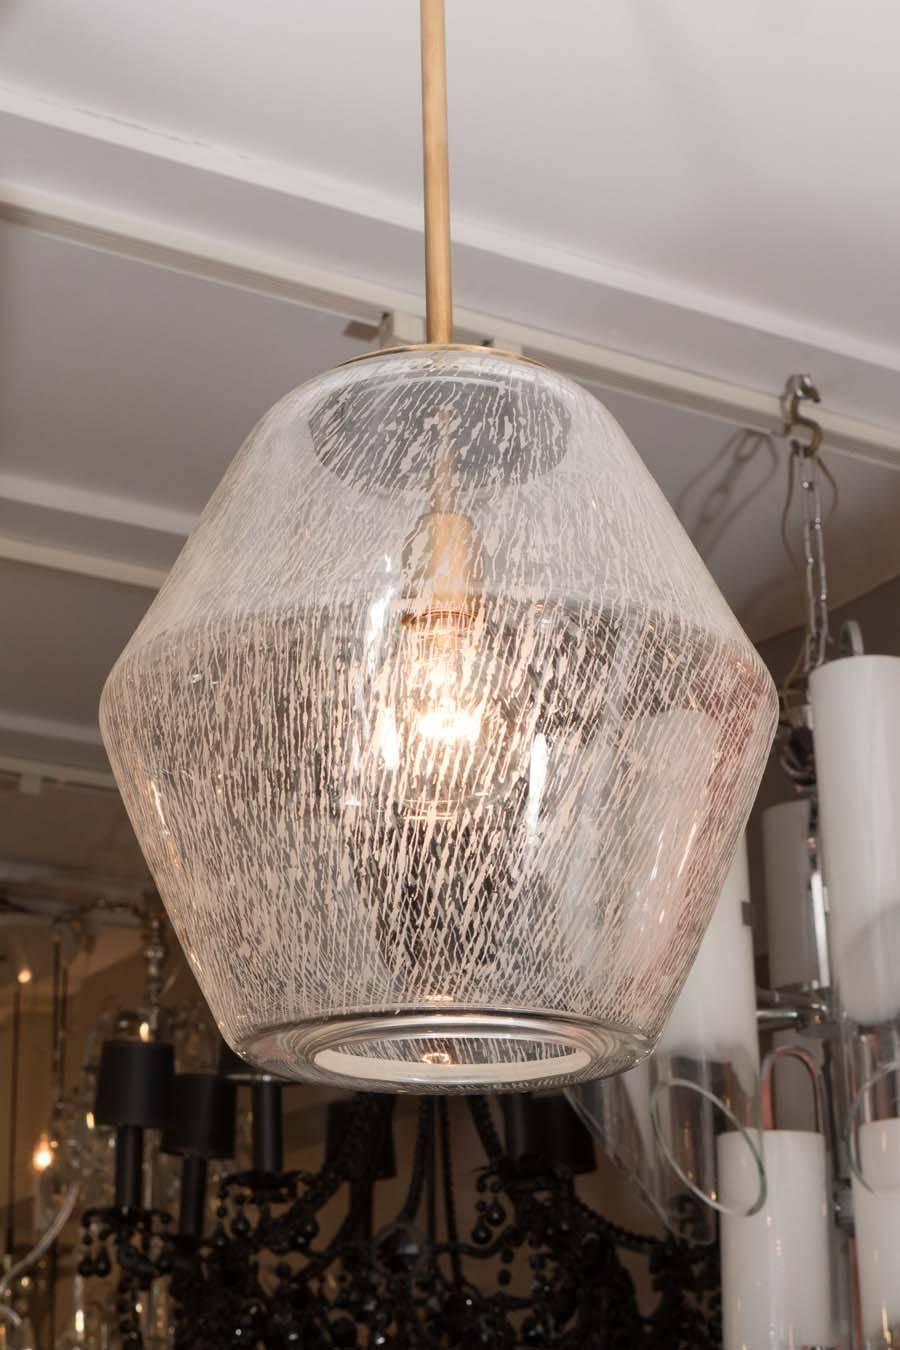 etched glass pendant light